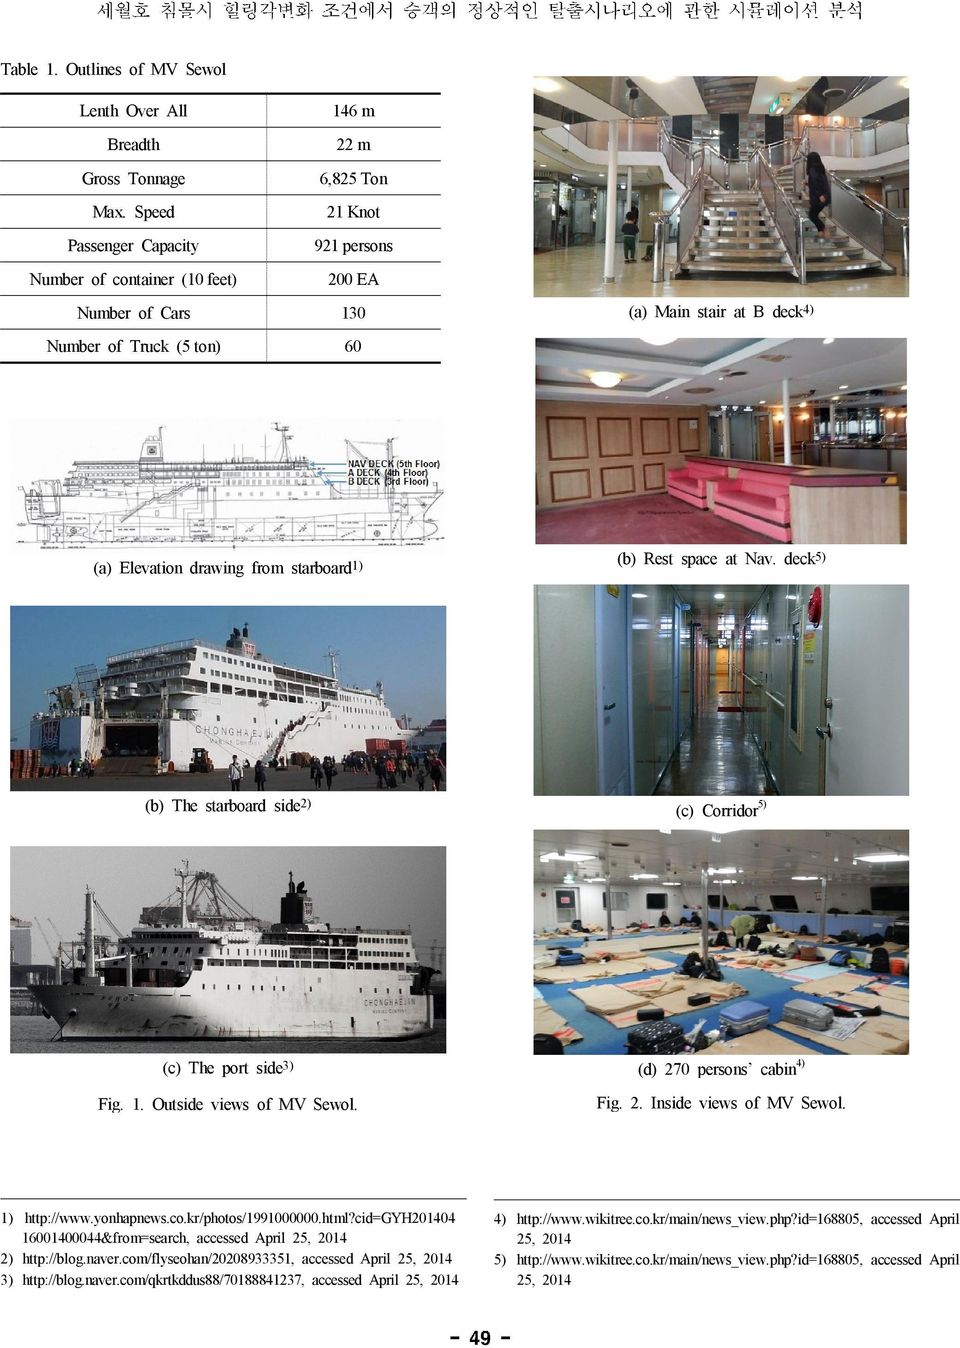 Rest space at Nav. deck 5) (b) The starboard side 2) (c) Corridor 5) (c) The port side 3) Fig. 1. Outside views of MV Sewol. (d) 270 persons cabin 4) Fig. 2. Inside views of MV Sewol. 1) http://www.